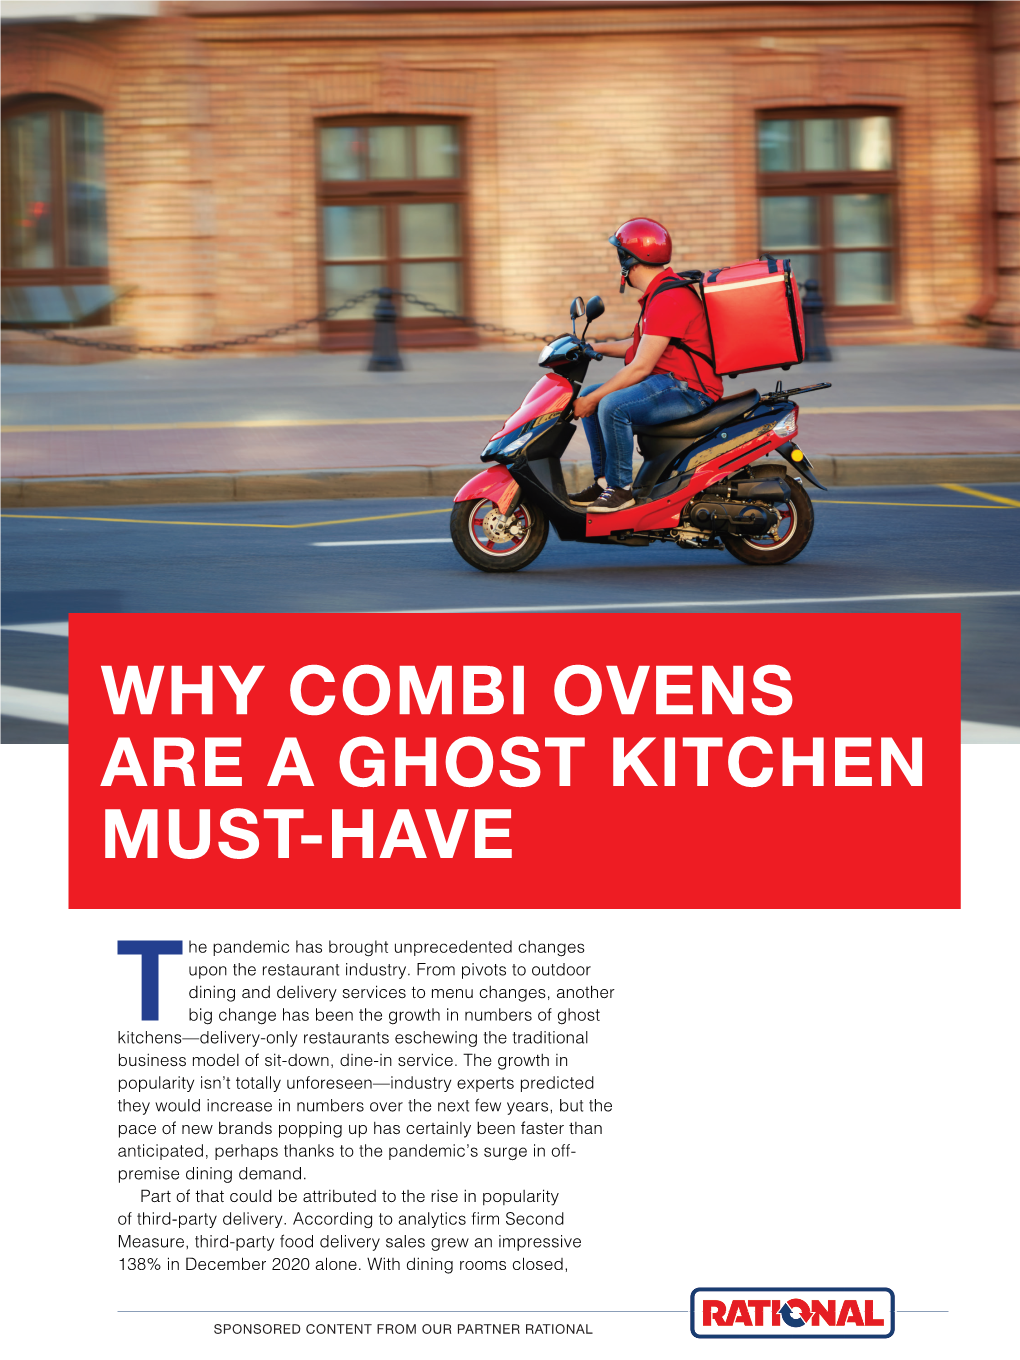 Why Combi Ovens Are a Ghost Kitchen Must-Have